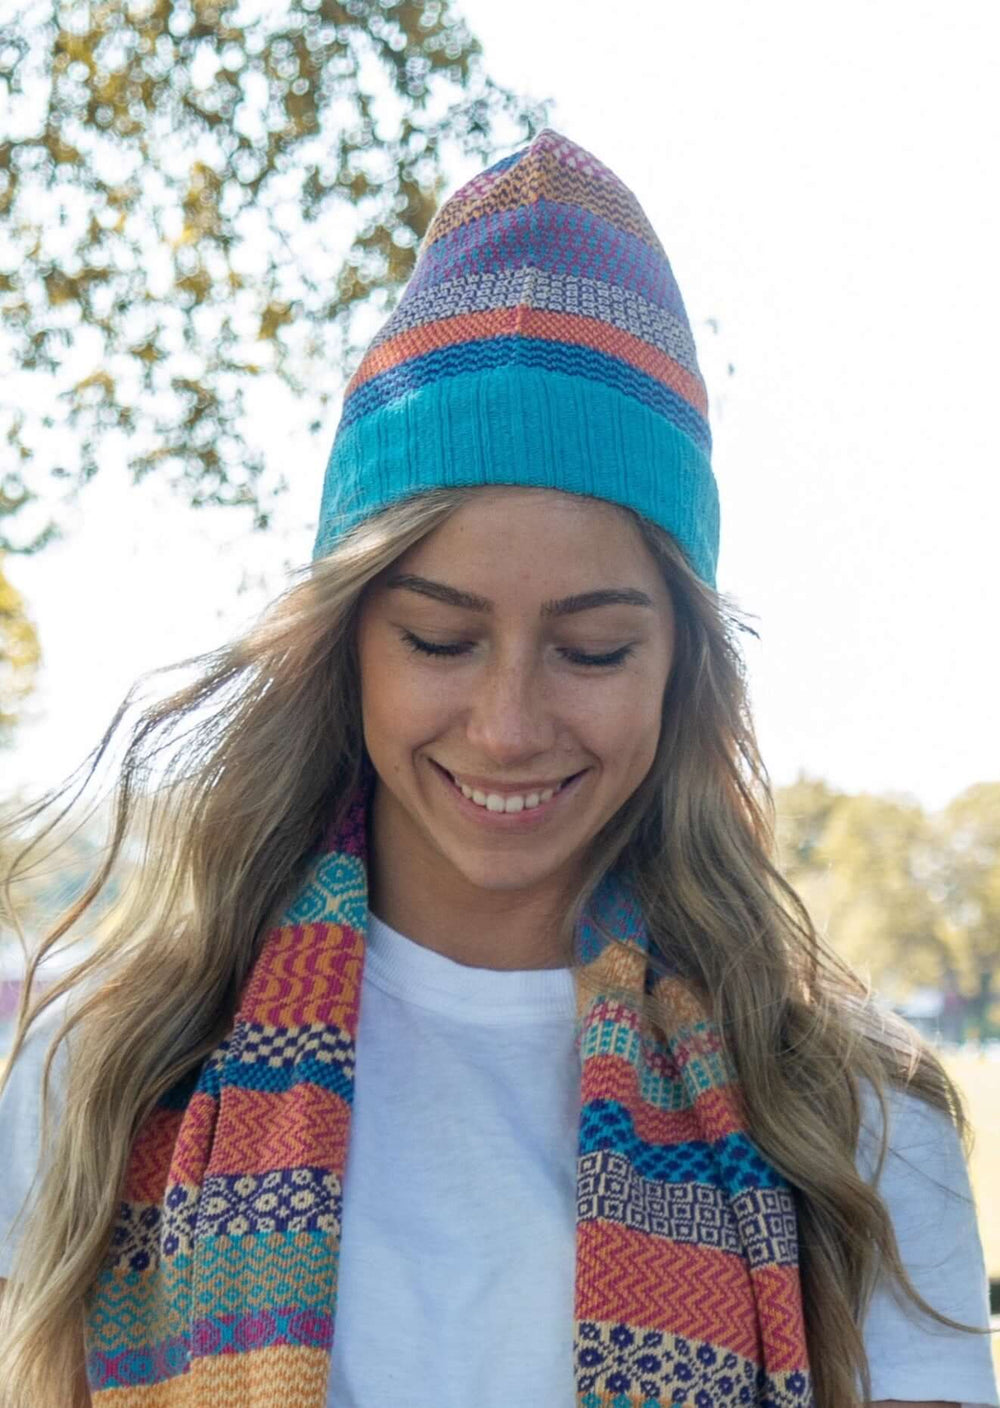 Solmate SUNNY Knitted Beanie Hat with With an Array of Bright Colors | Made in USA | Classy Cozy Cool Women's Made in America Clothing Boutique